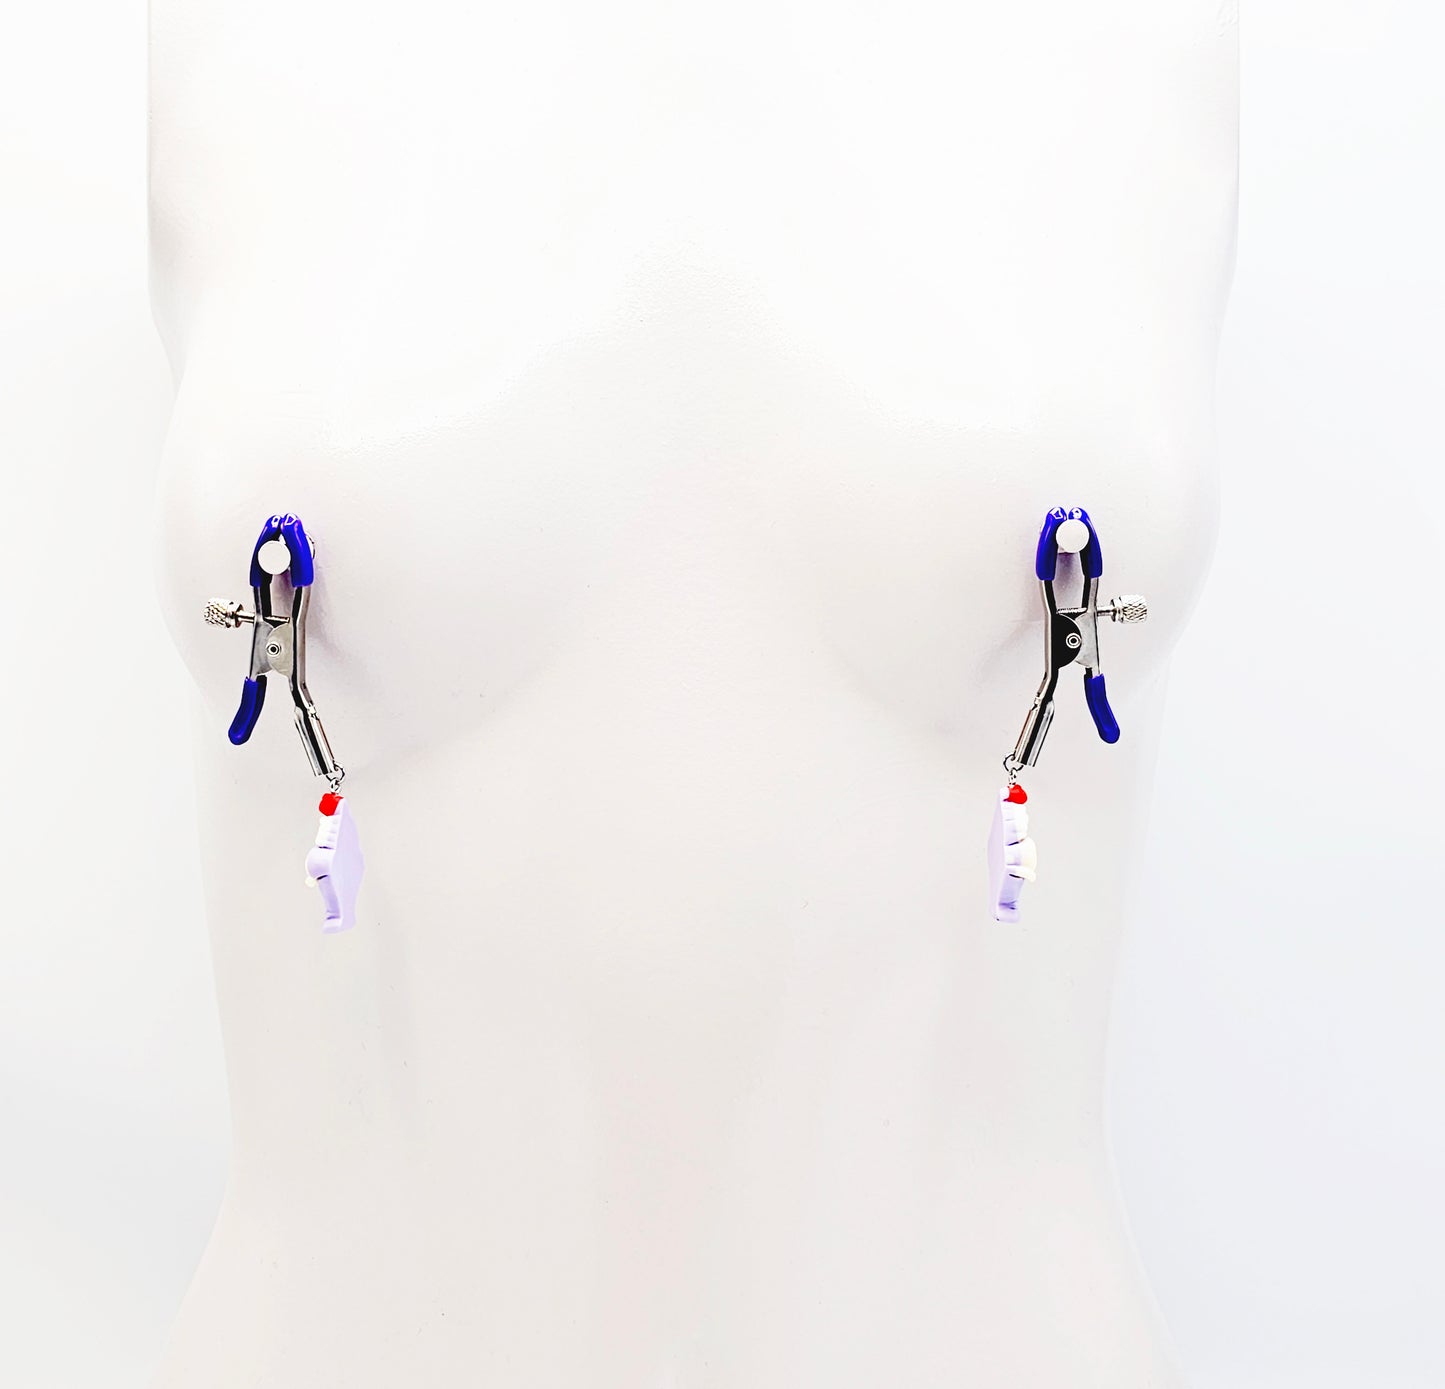 Purple Adjustable Nipple Clamps with Ice Cream Sundae for BDSM DDLG Summertime Fun!